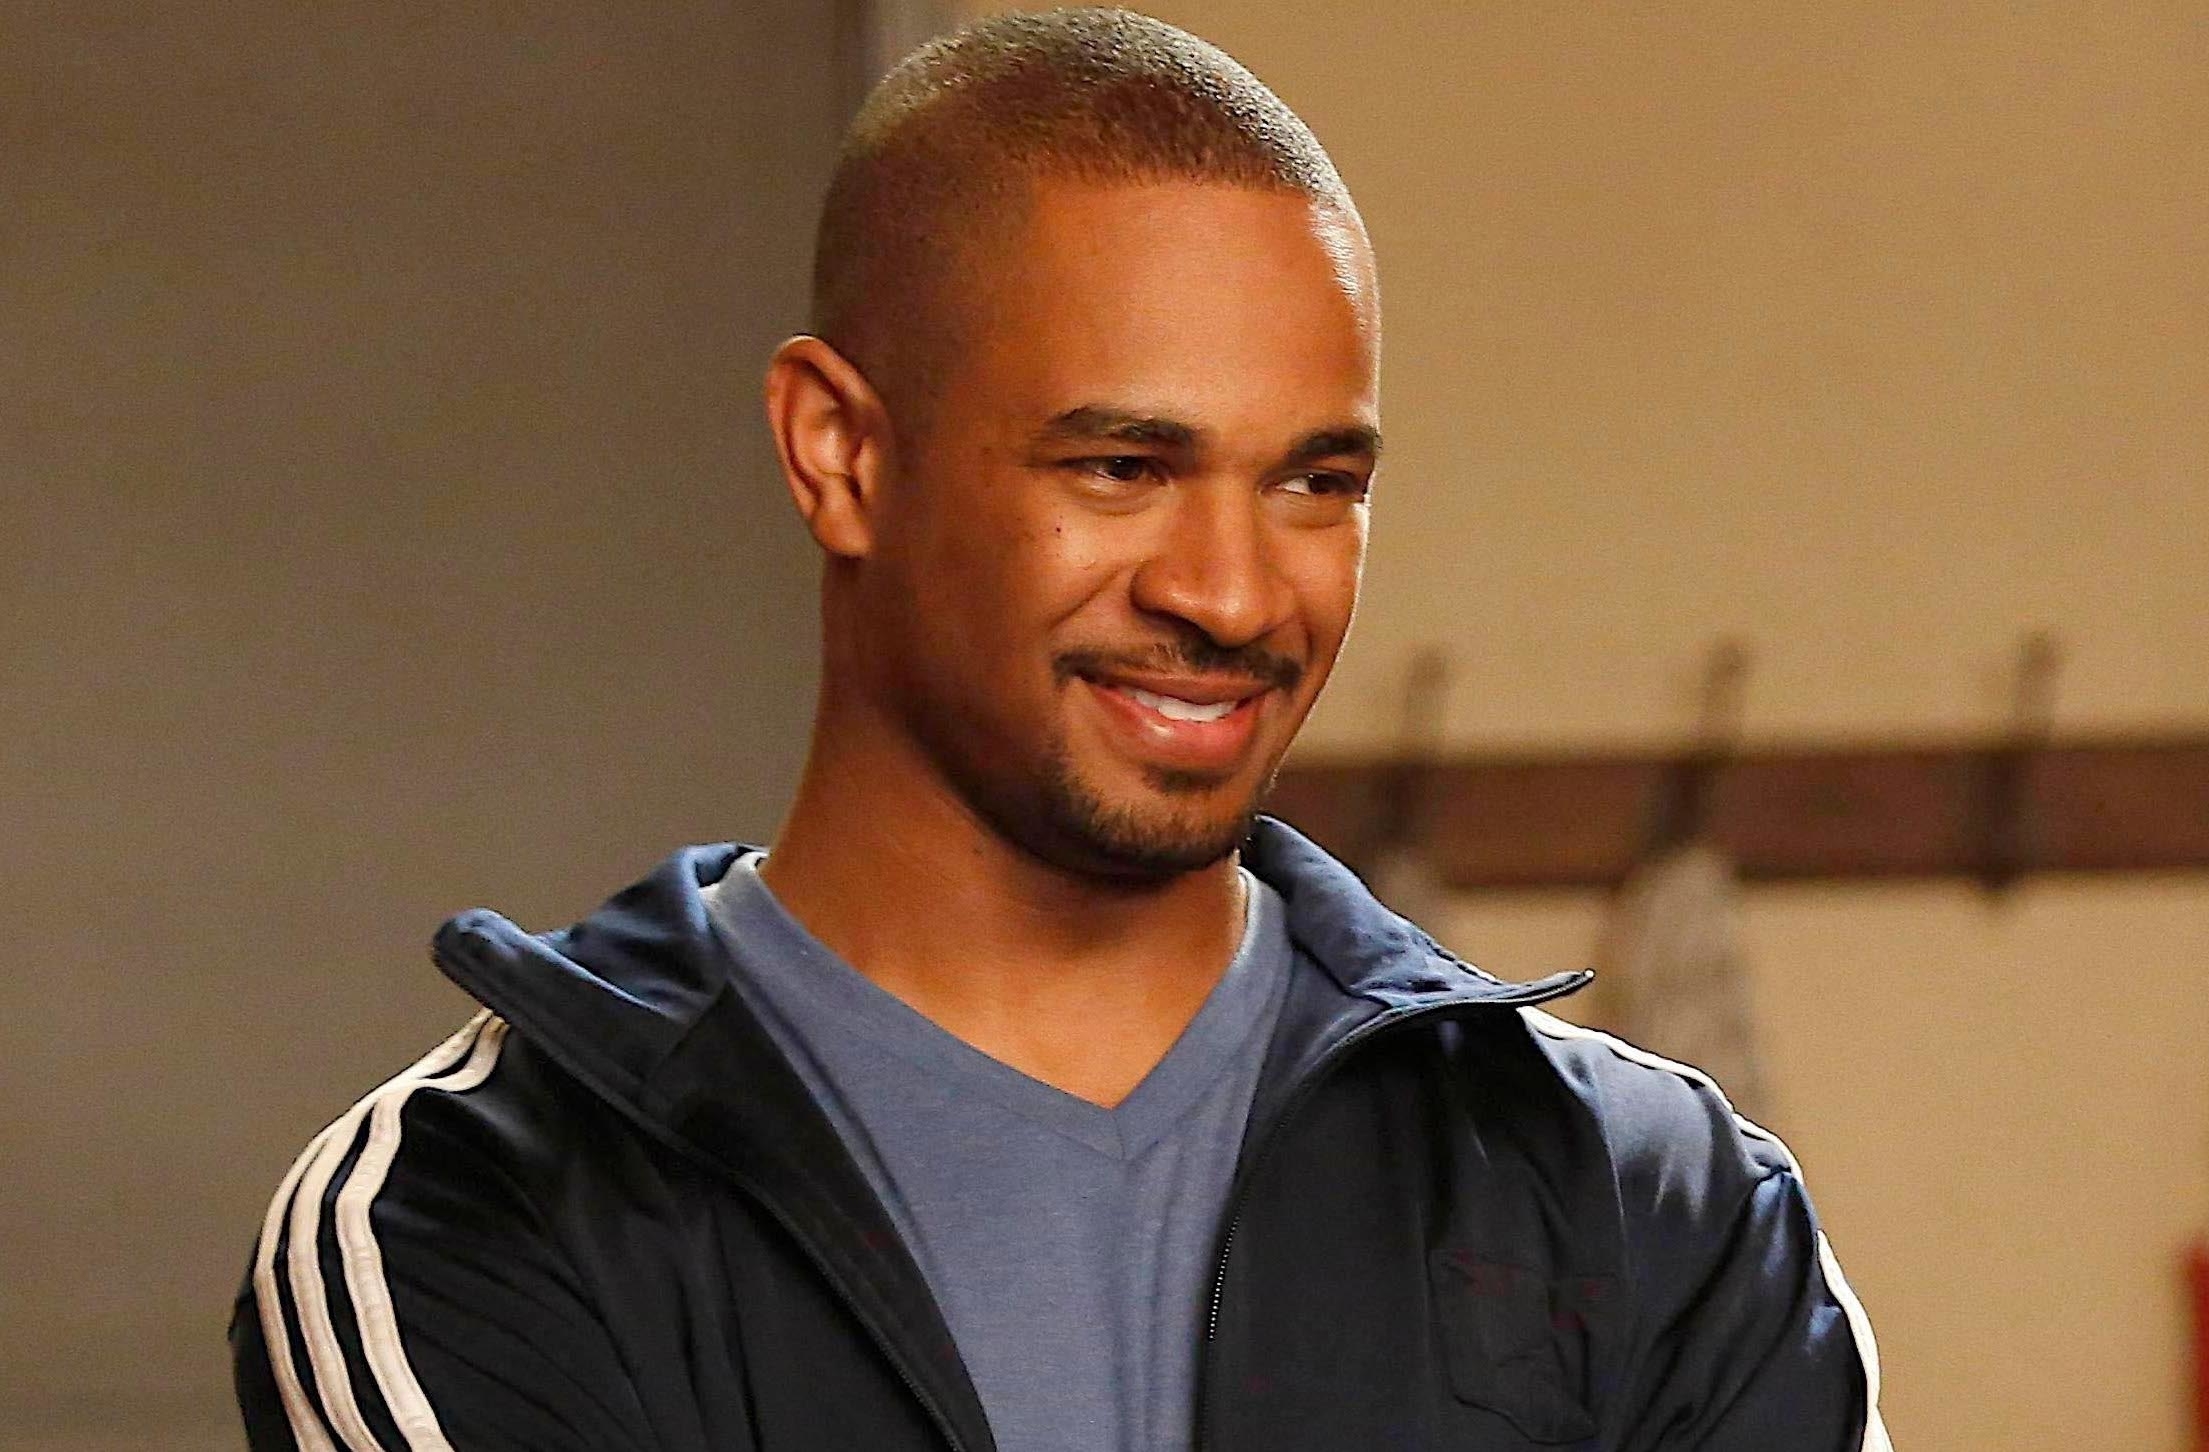 Actor in a blue tracksuit smiling in a TV show scene